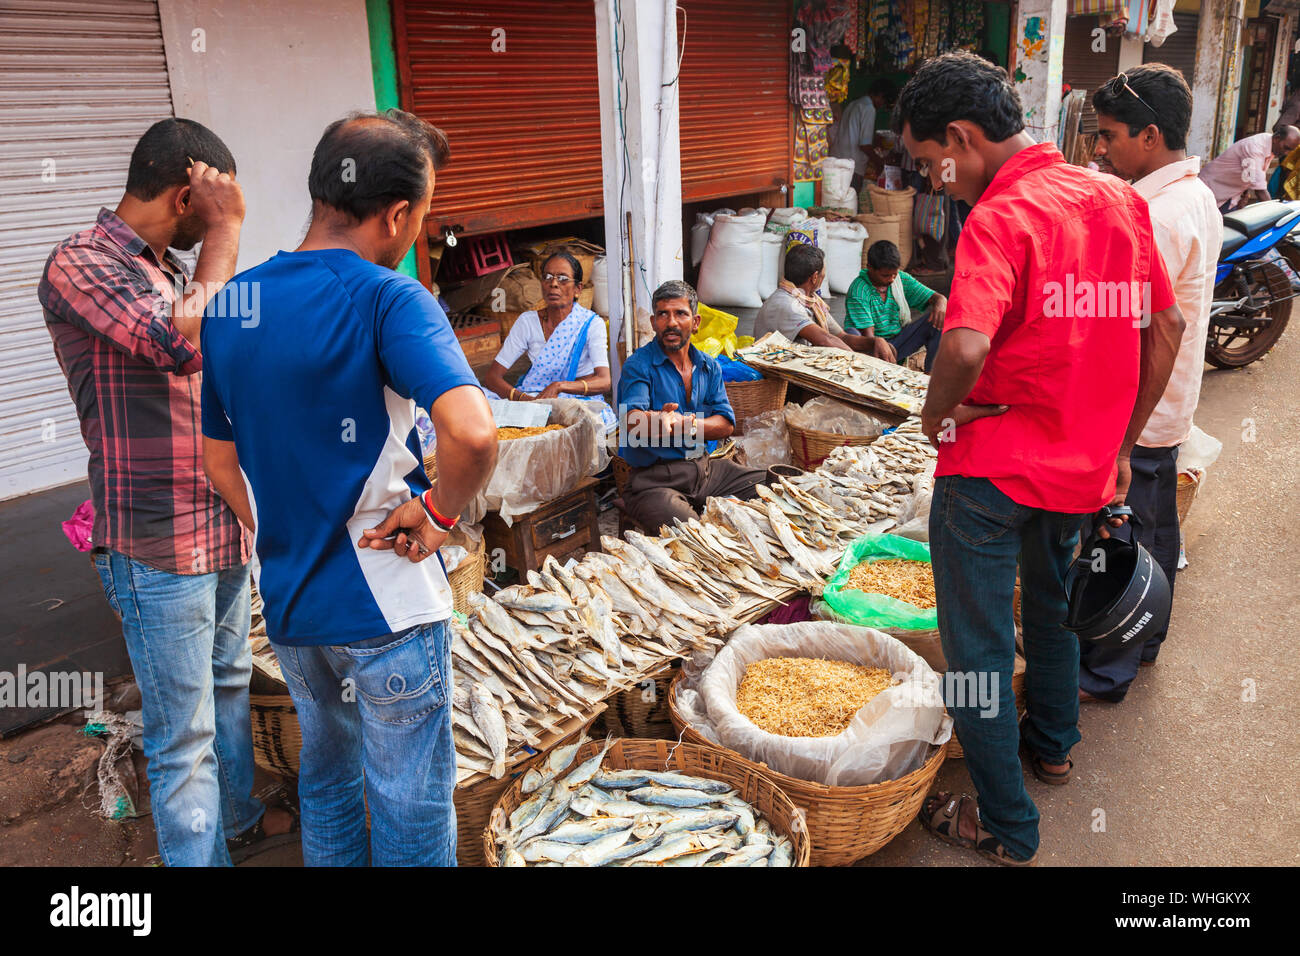 GOA, INDIA - APRIL 06, 2012: Fish and vegetables at the local market in India Stock Photo